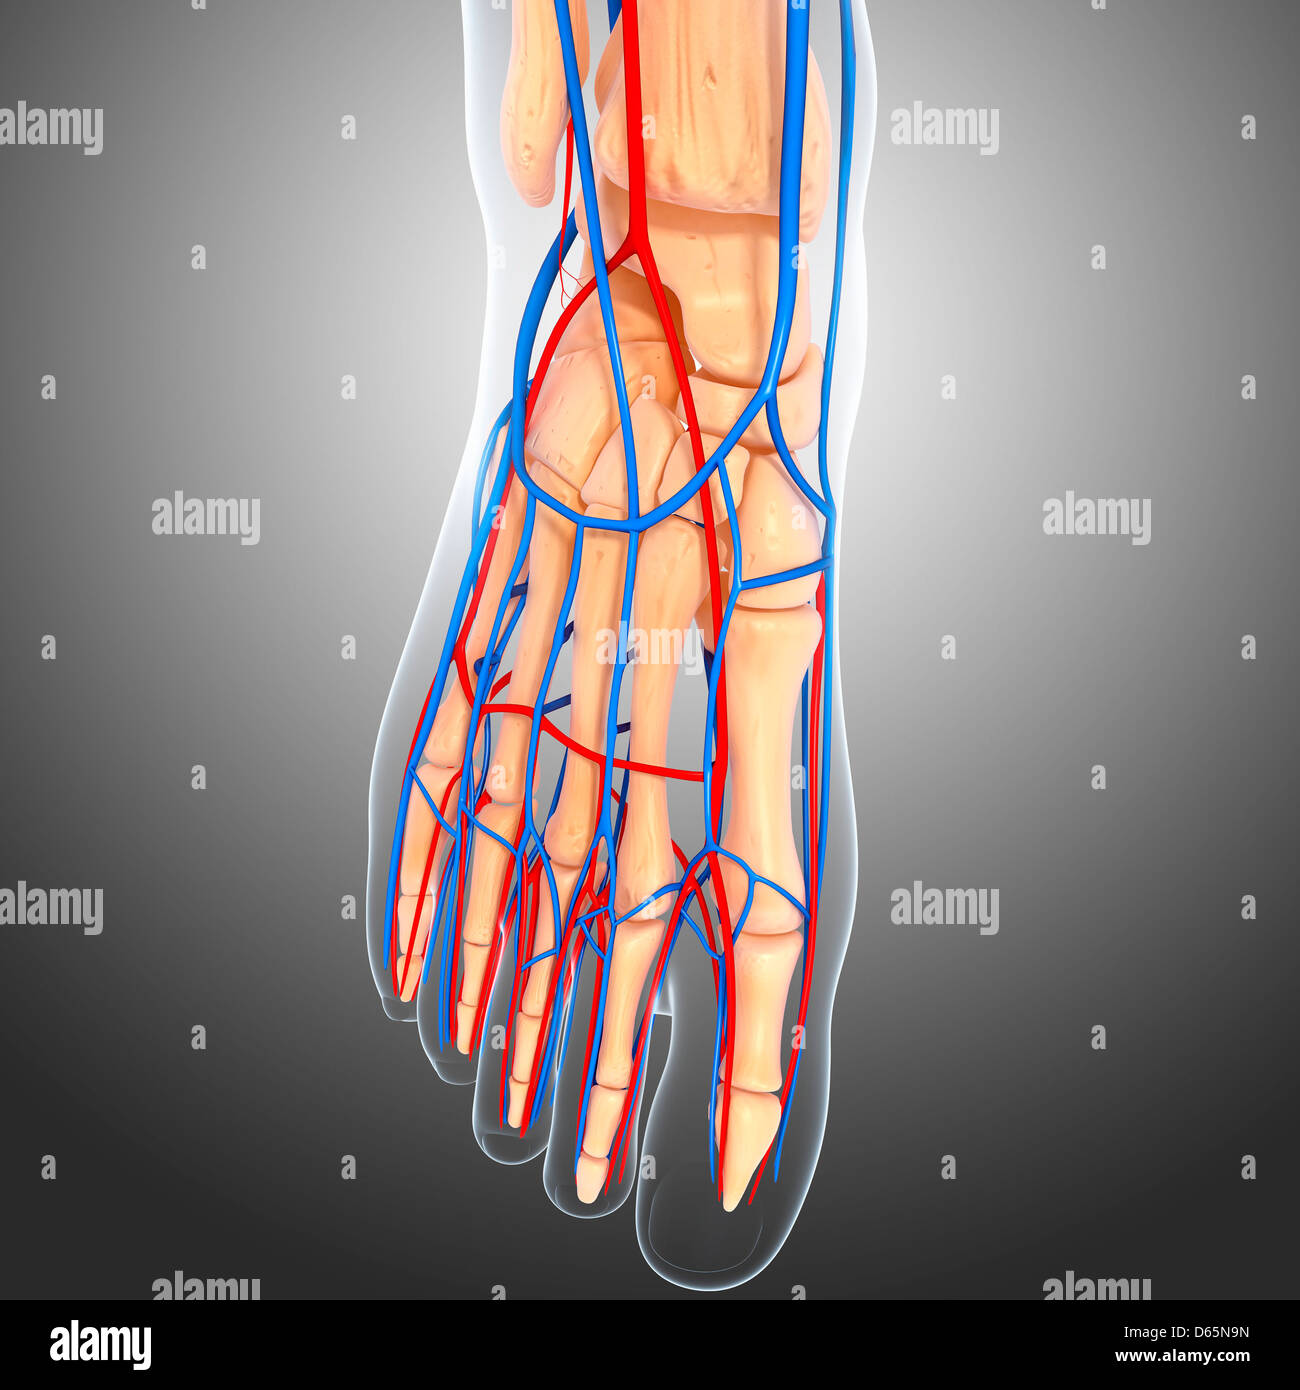 Human Foot Anatomy High Resolution Stock Photography and Images - Alamy